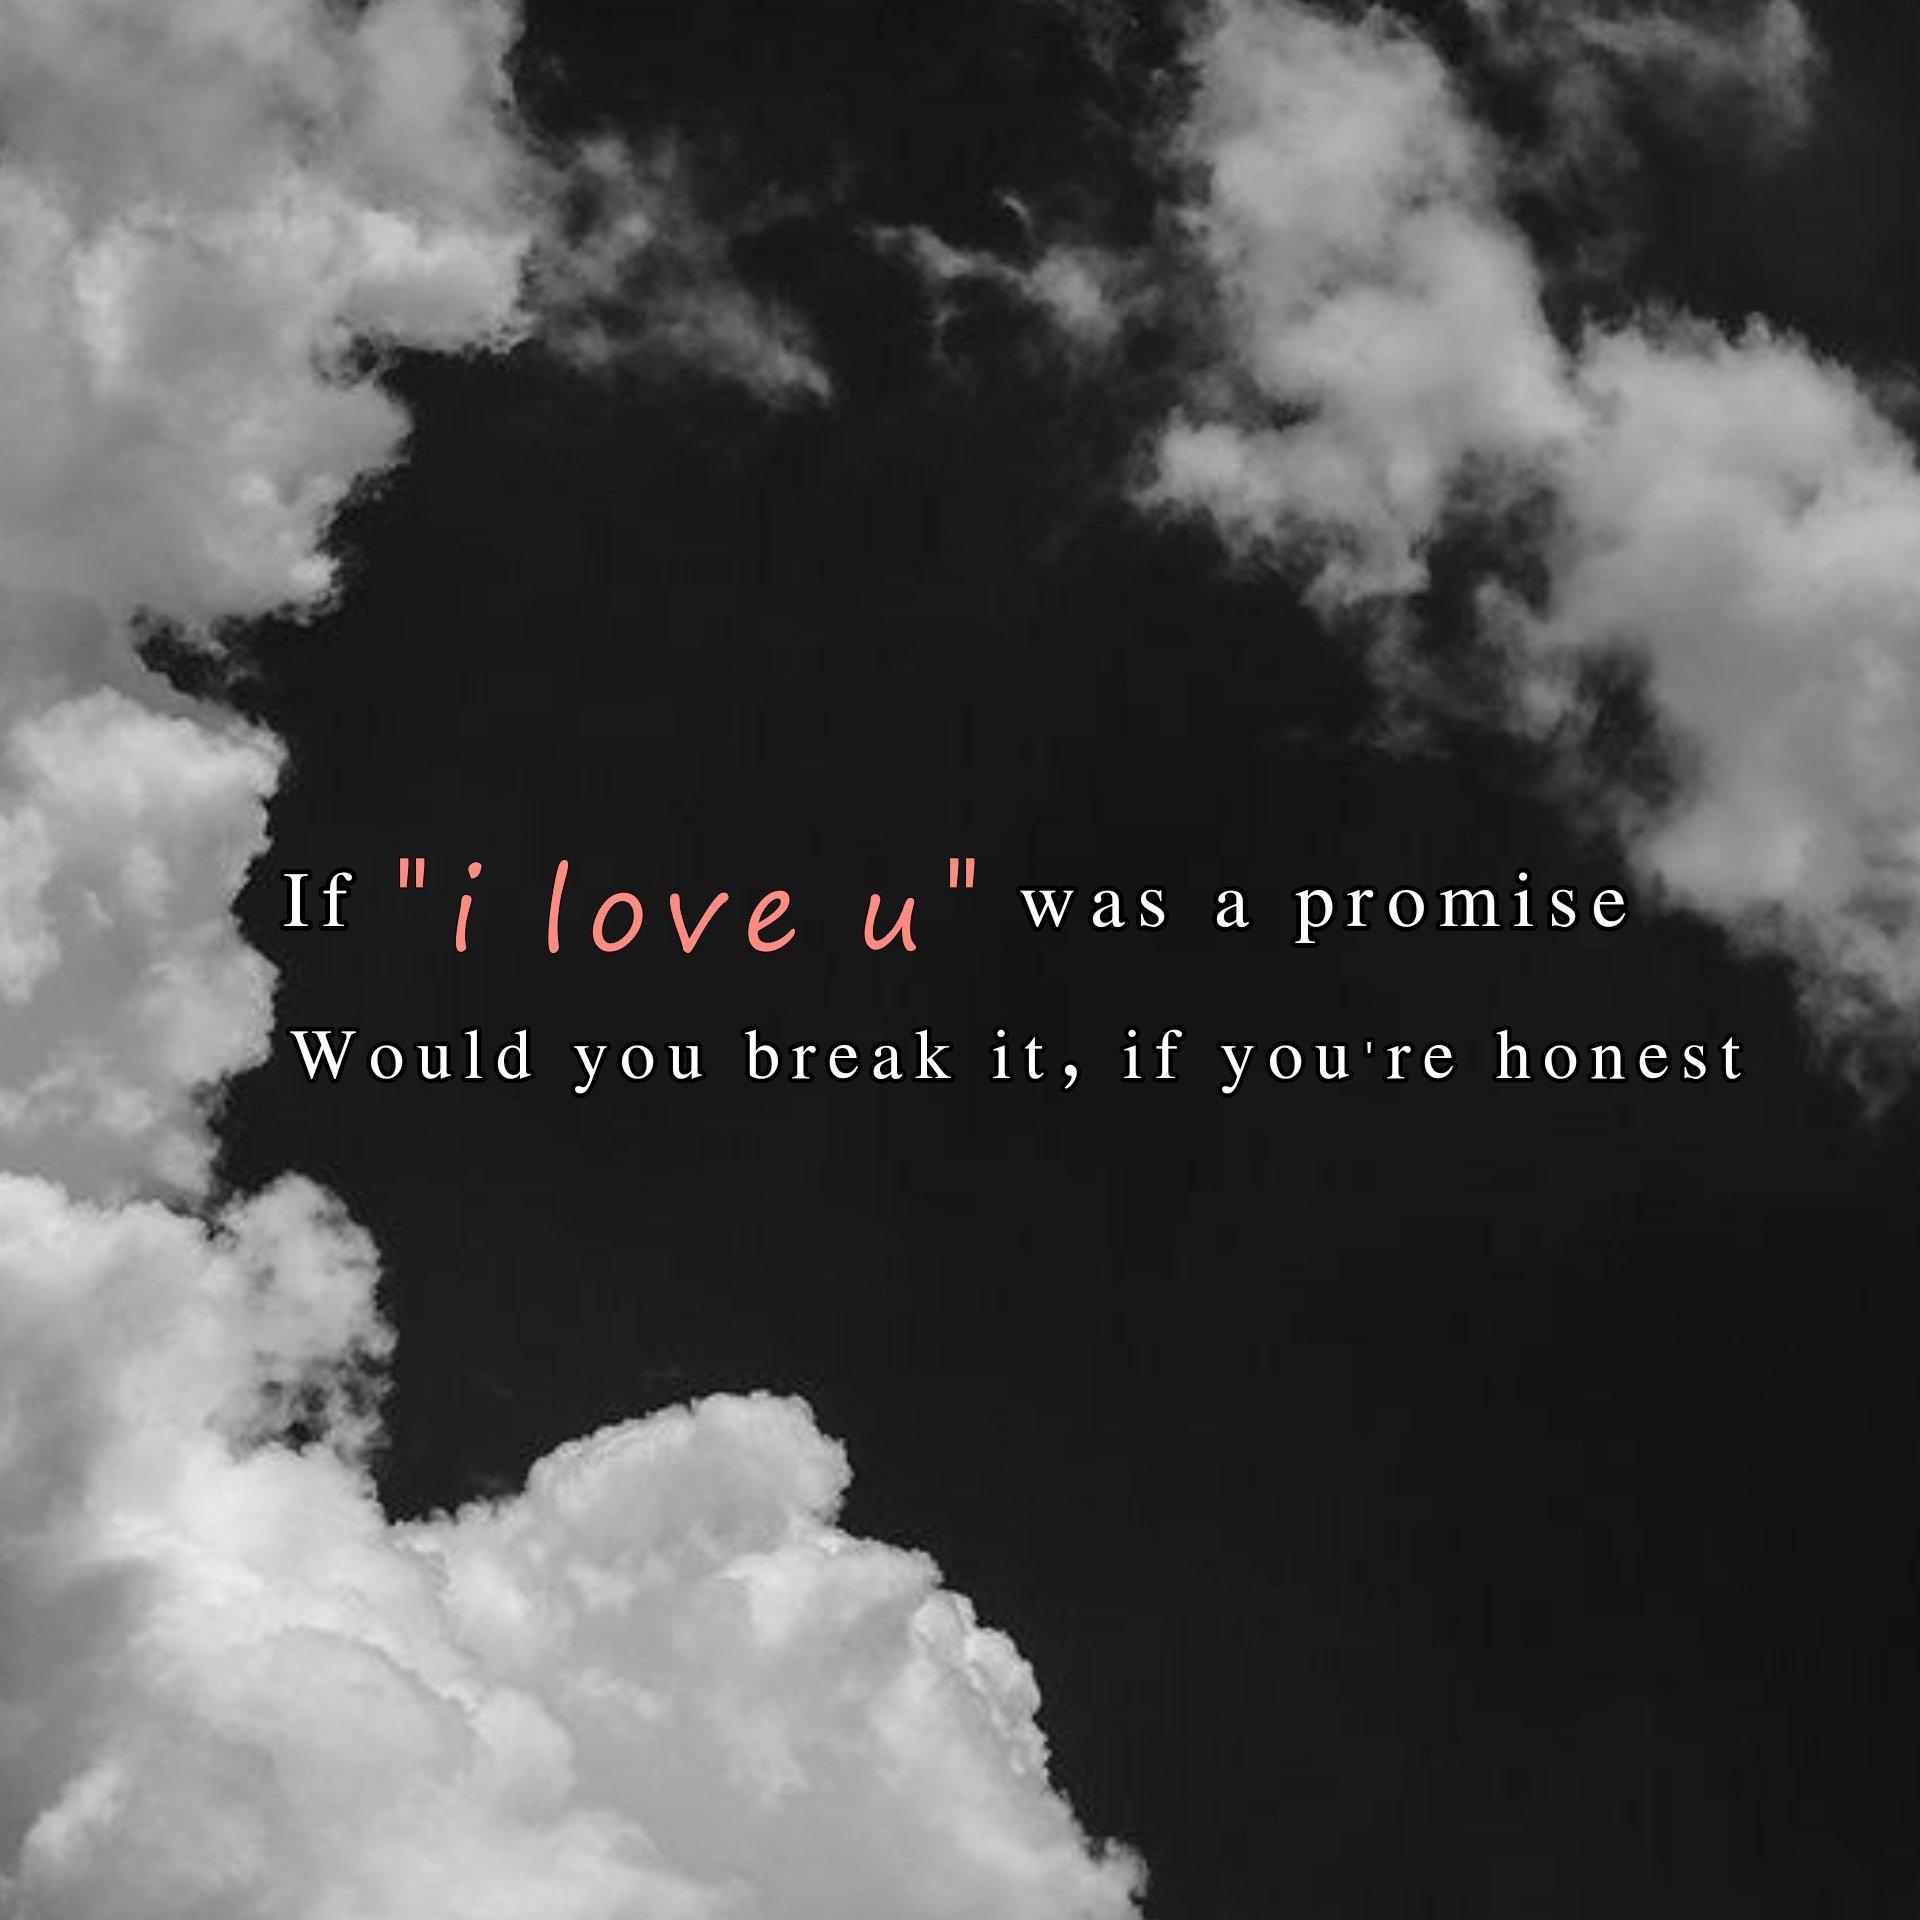 if i love you was a promise would you break it if you're honest